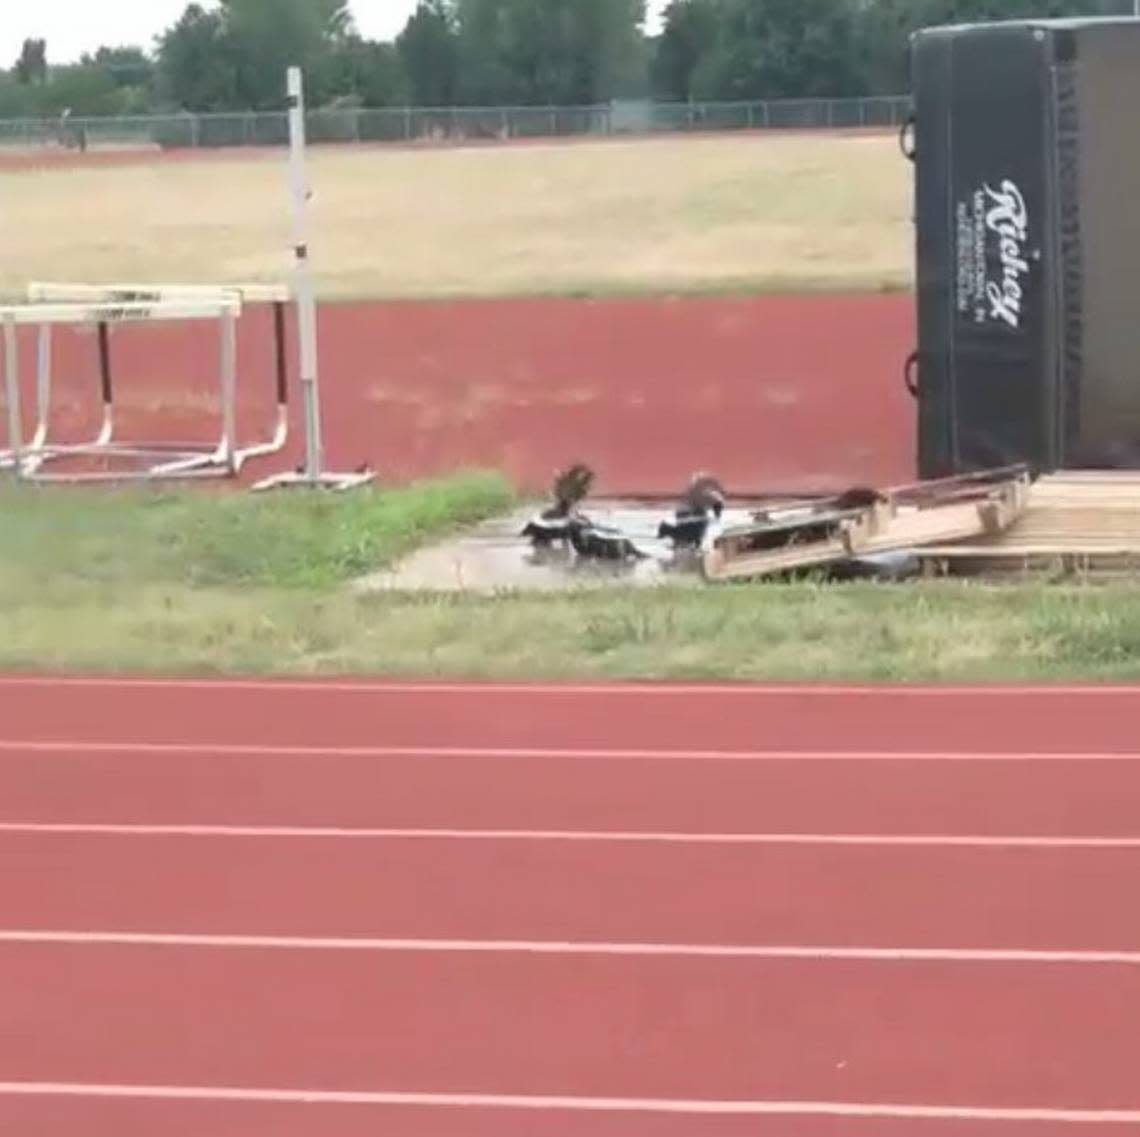 Pictured is a group skunks on top of a wooden pallet sitting in the Newton High School track field.